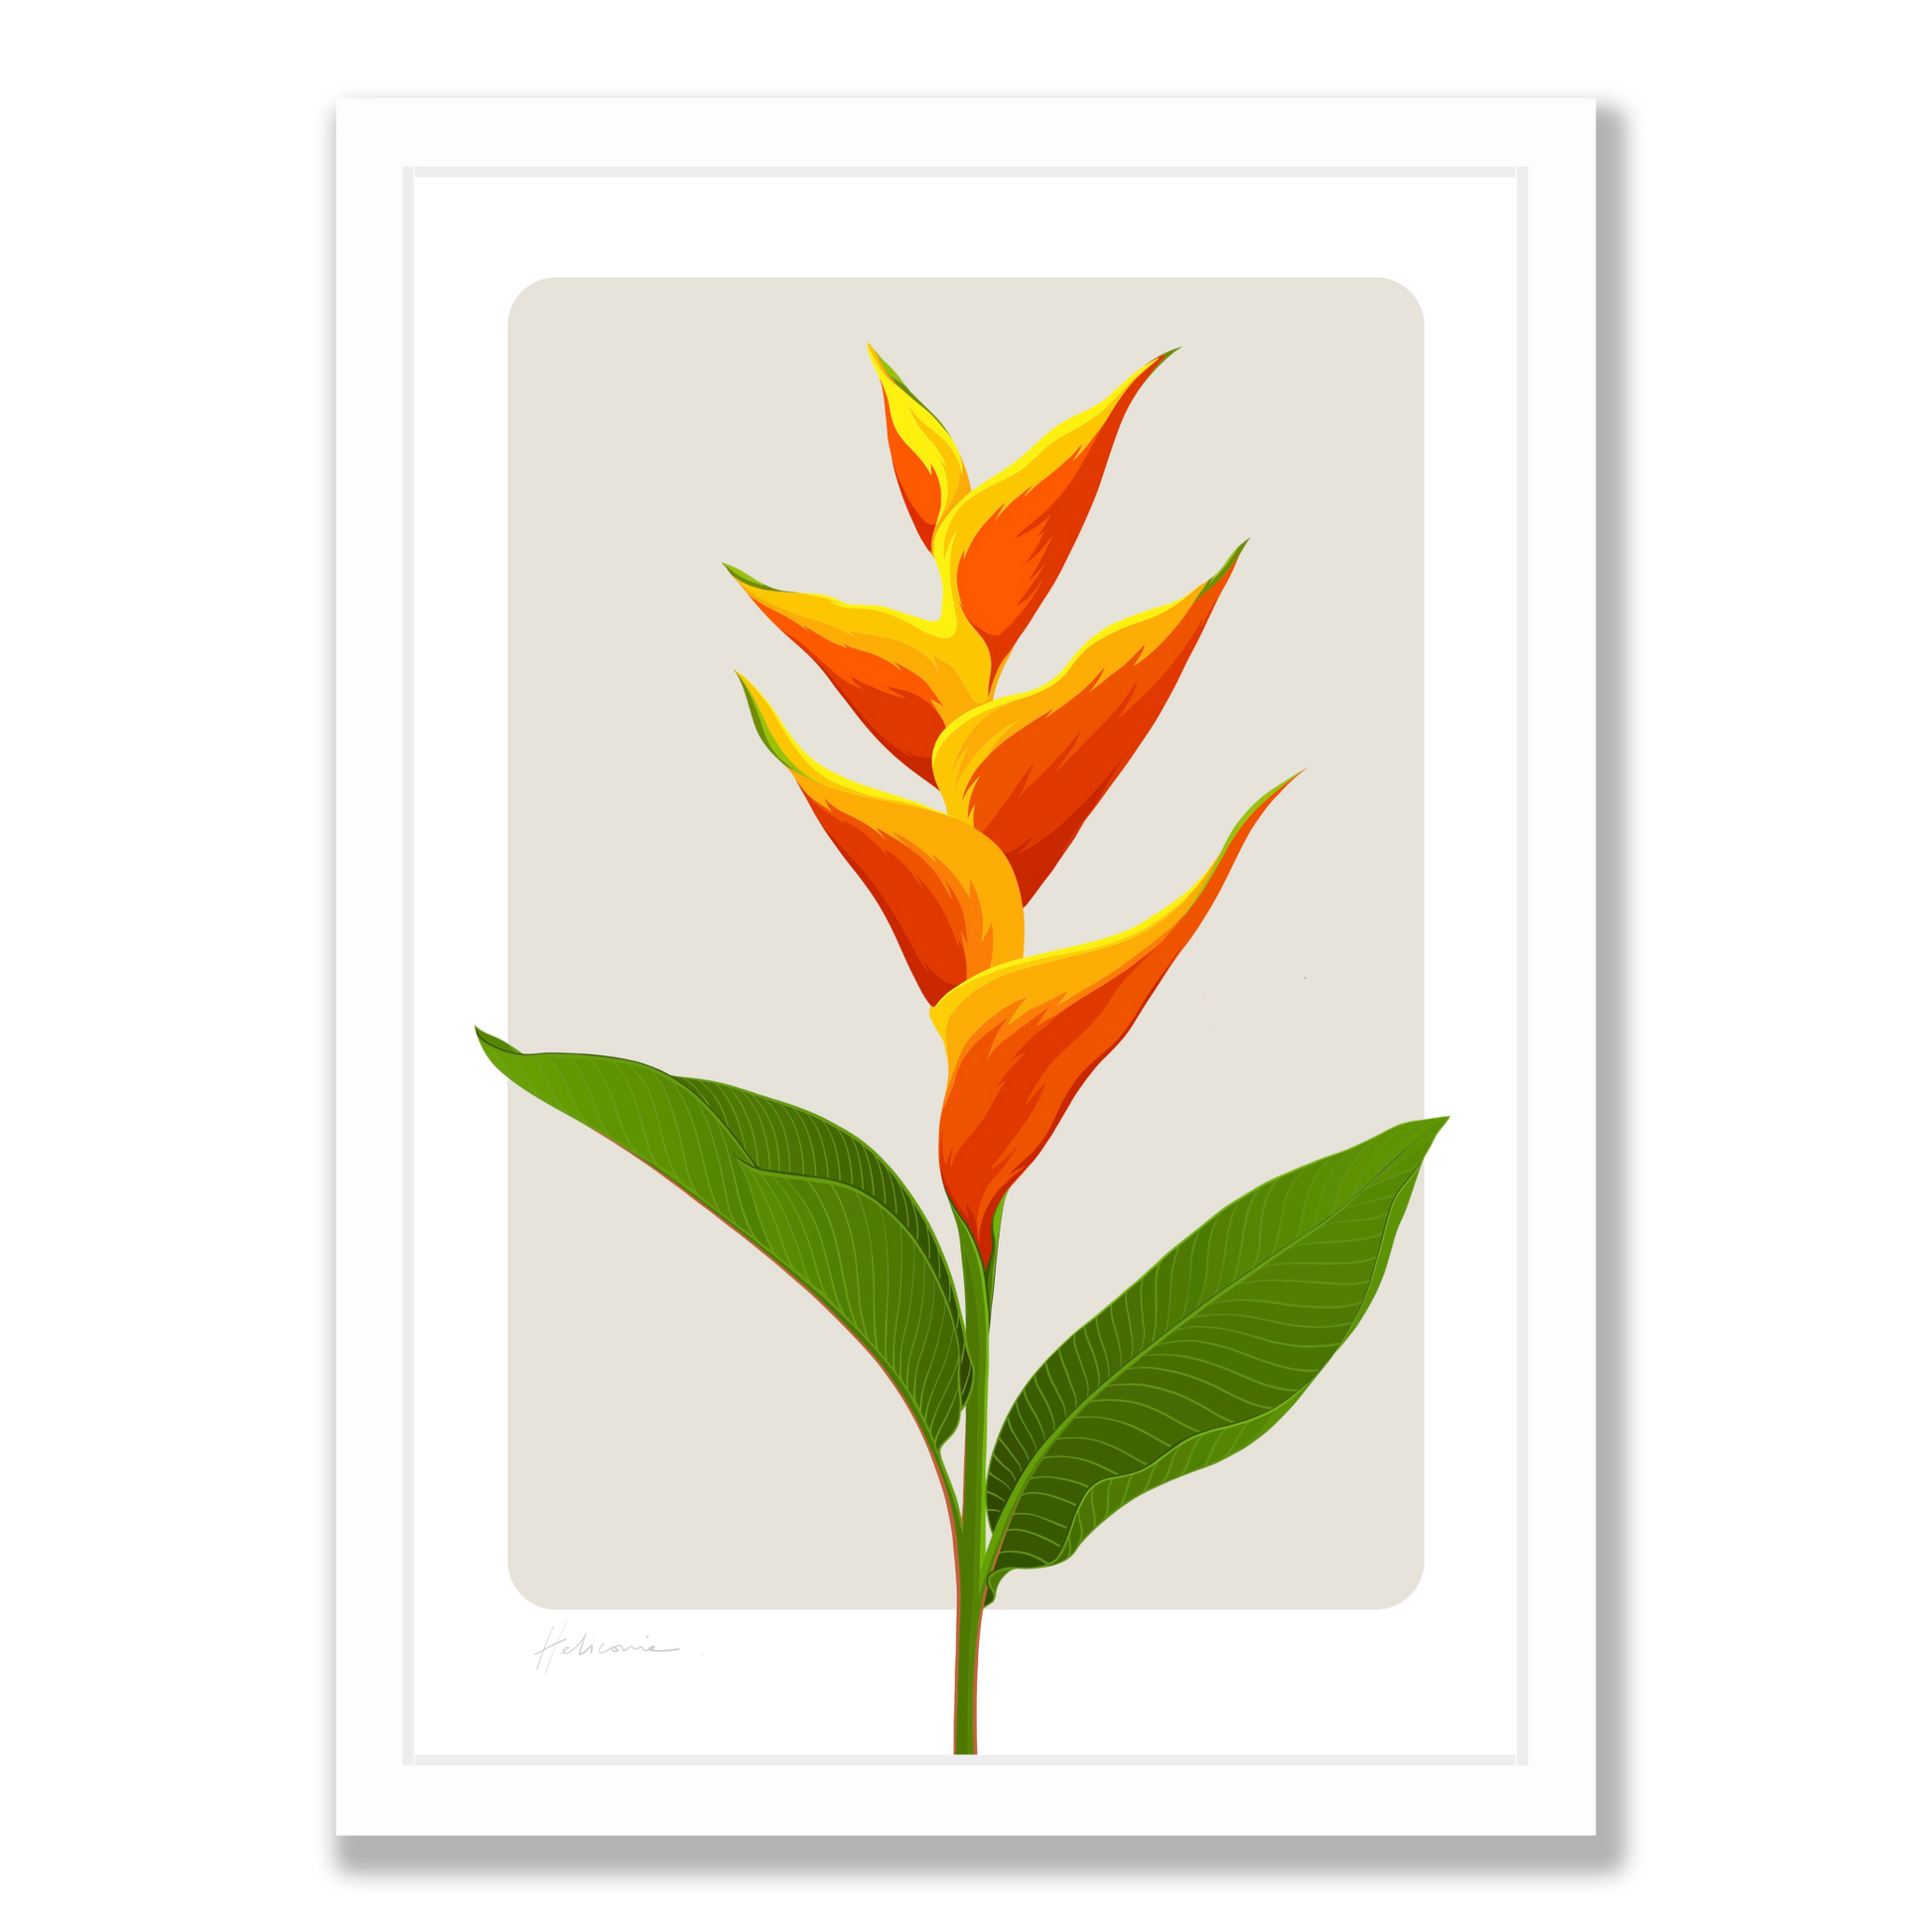 Heliconia art print in white frame, by NZ artist Hansby Design